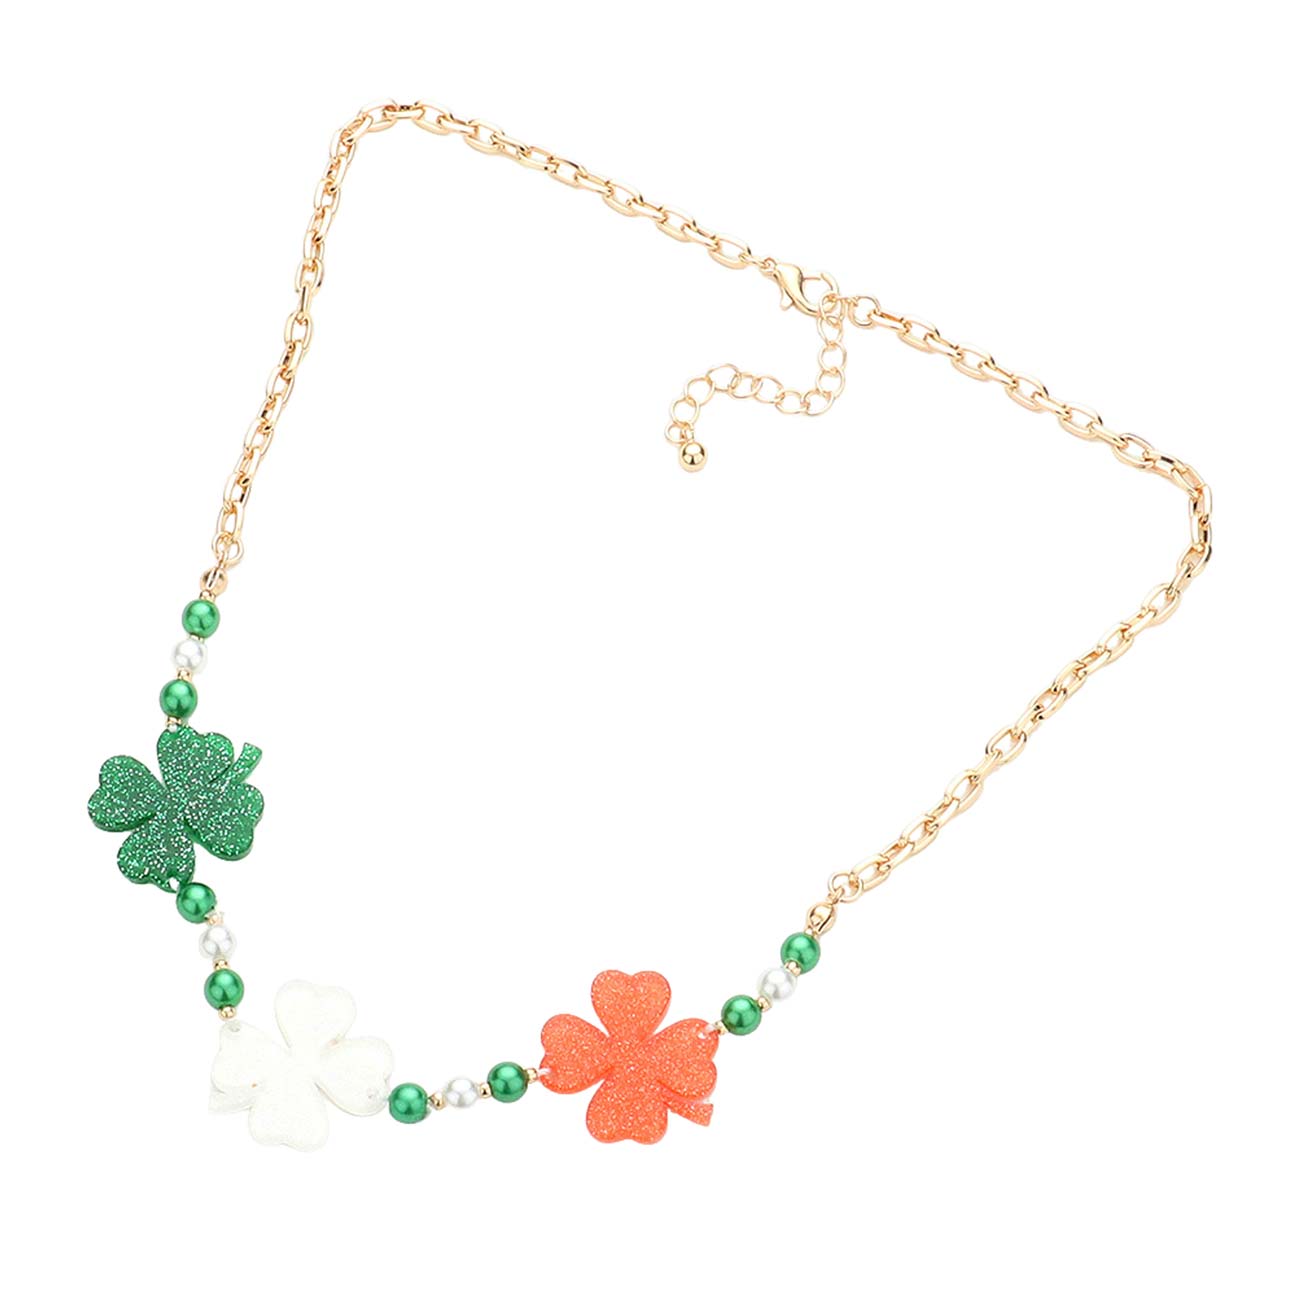 Multi St. Patrick's Day Triple Glittered Resin Clover Pearl Necklace, is perfect to accent your love for the Irish while wearing this beautiful jewelry set. The luck of St. Patrick's Day will be with you this year with these beautiful pearl pendant necklaces. These cute glittered resin necklaces are the perfect accessory to finish off St. Patrick's Day or any festive look. Show your unique & beautiful choice with this St. Patrick's Day clover pearl nec